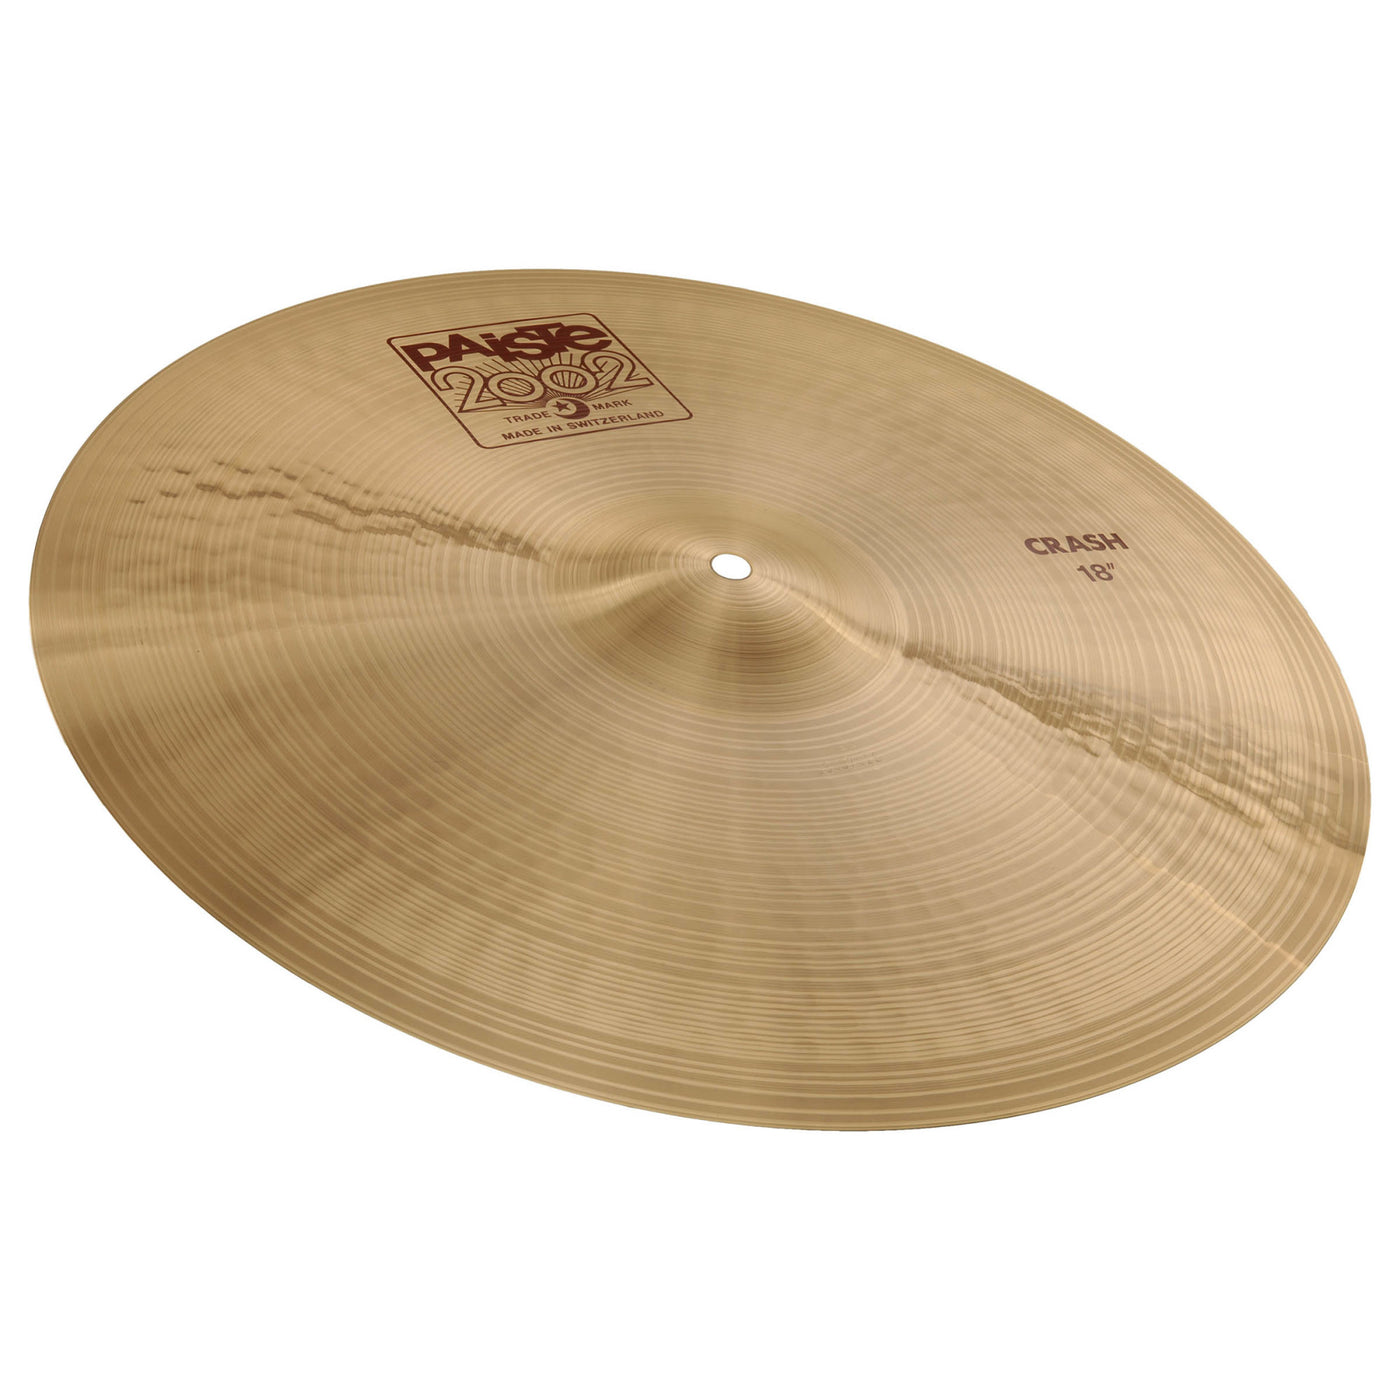 Paiste 1061418 Crash Cymbal, 2002 Series, Percussion Instrument for Drums, 18"